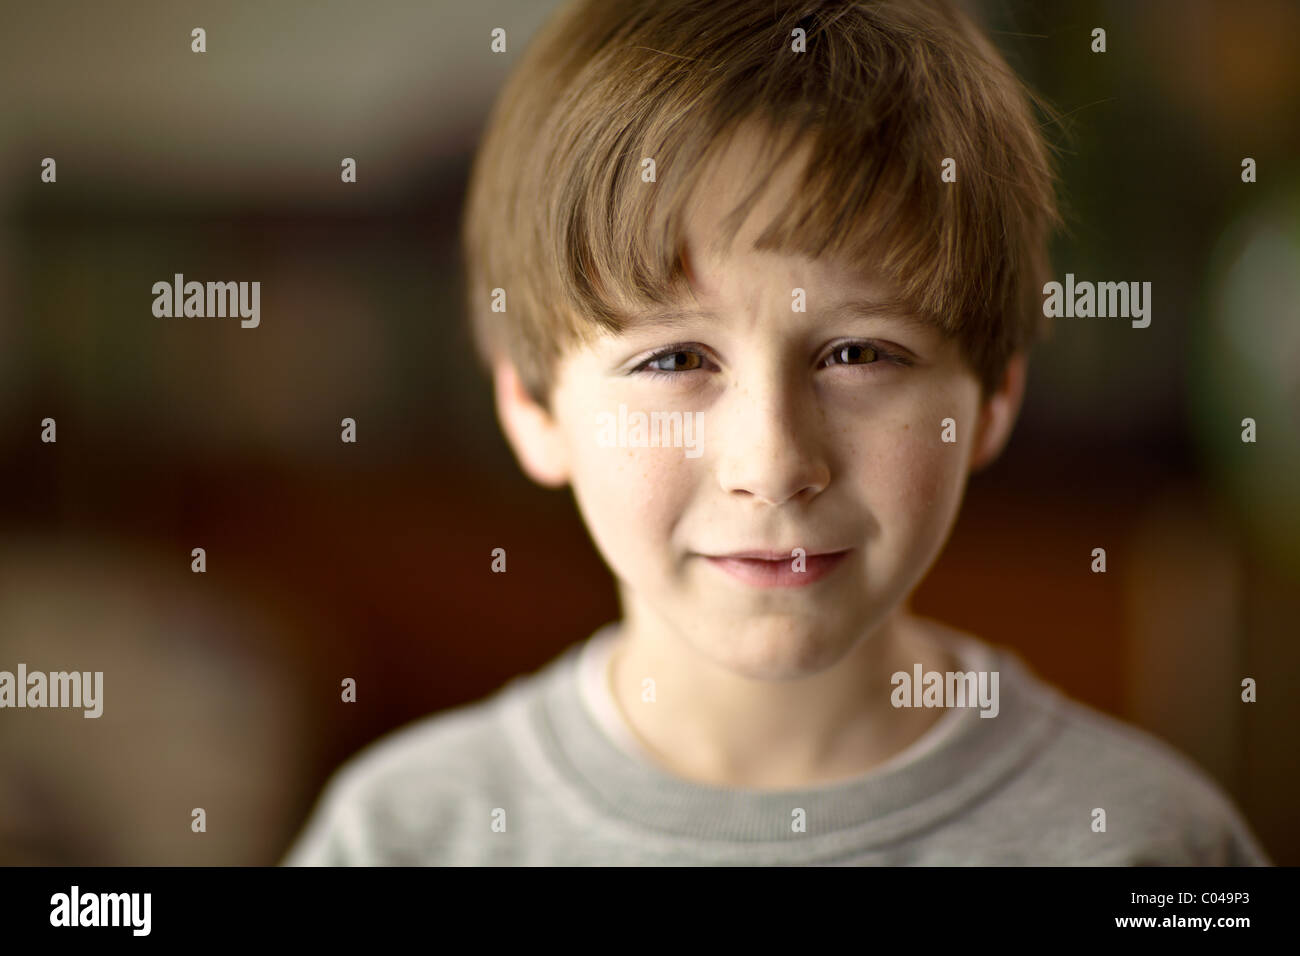 Small boy with anxious look on his face. Stock Photo